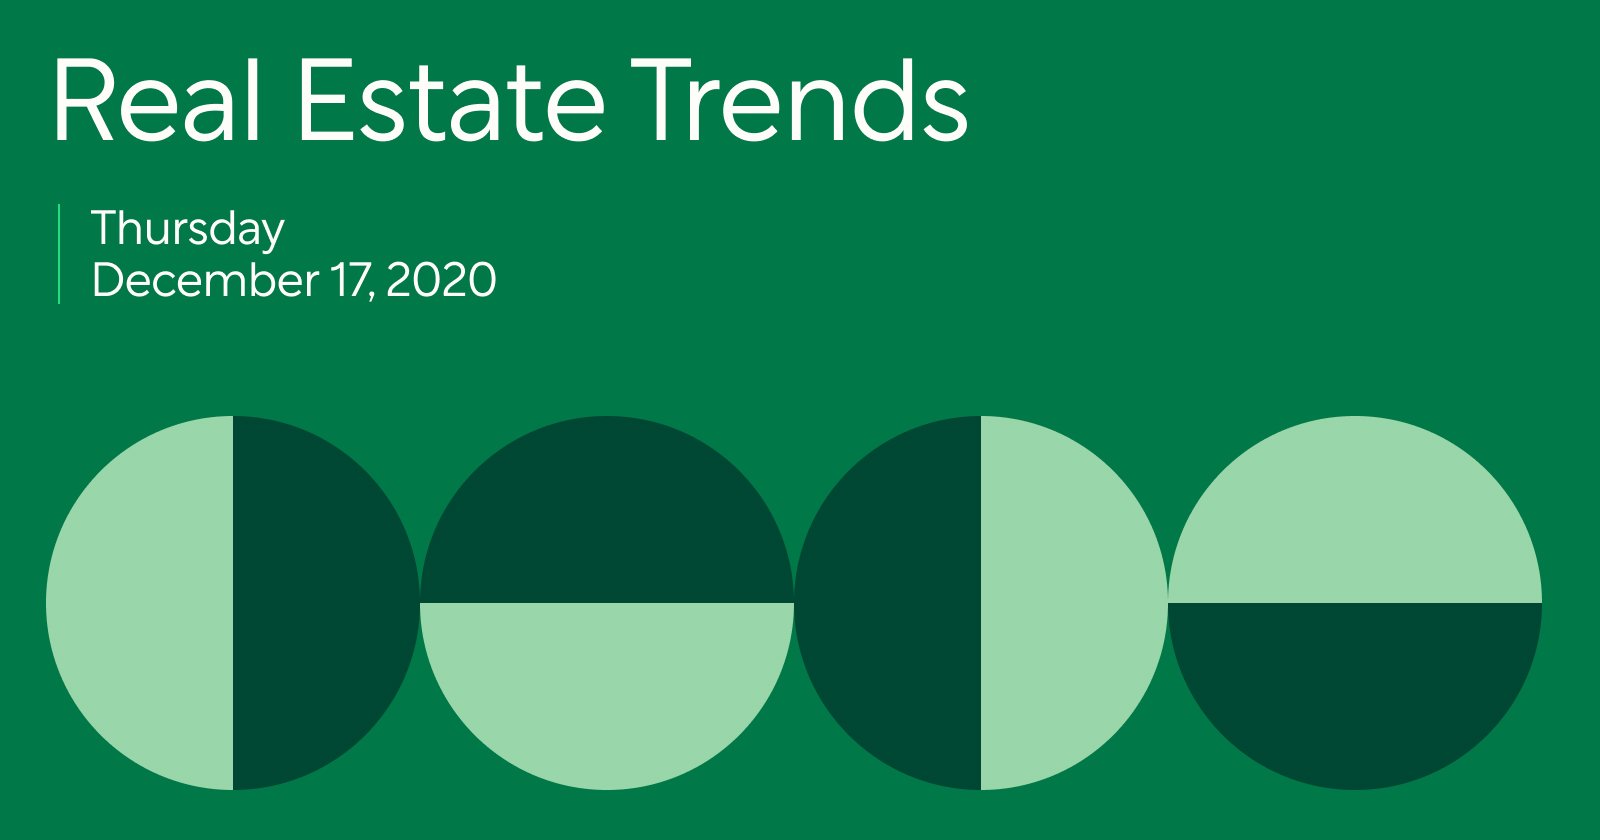 Real Estate Trends 12/17/20: Strong demand and low rates continue into Q1 2021